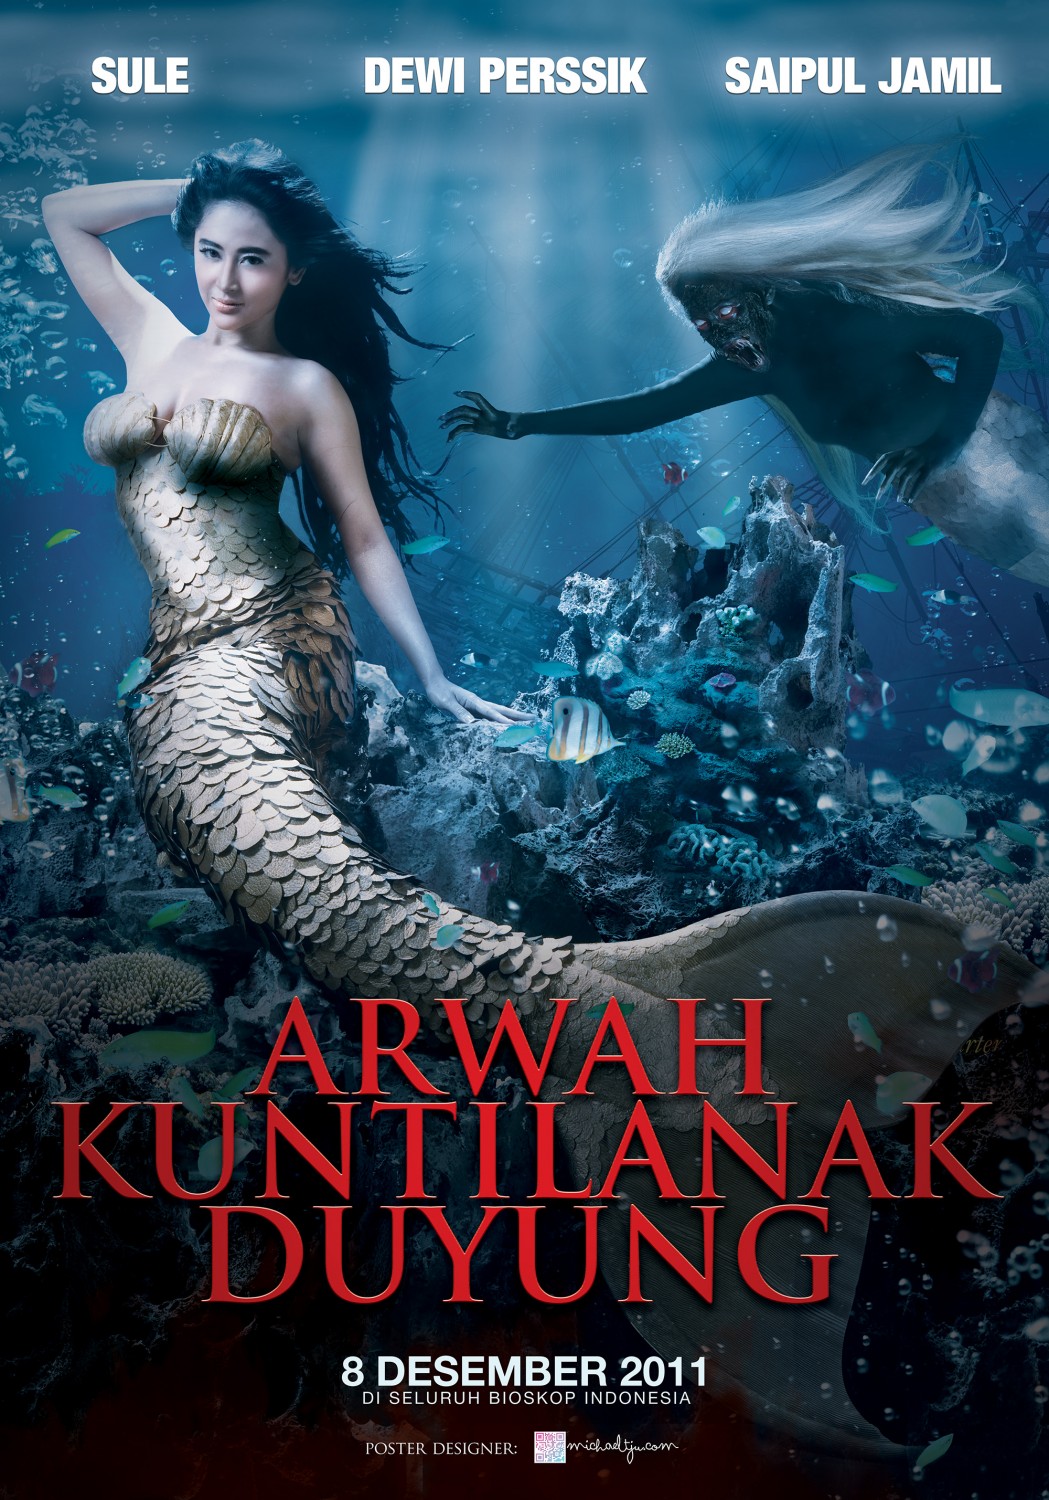 Extra Large Movie Poster Image for Arwah kuntilanak duyung 